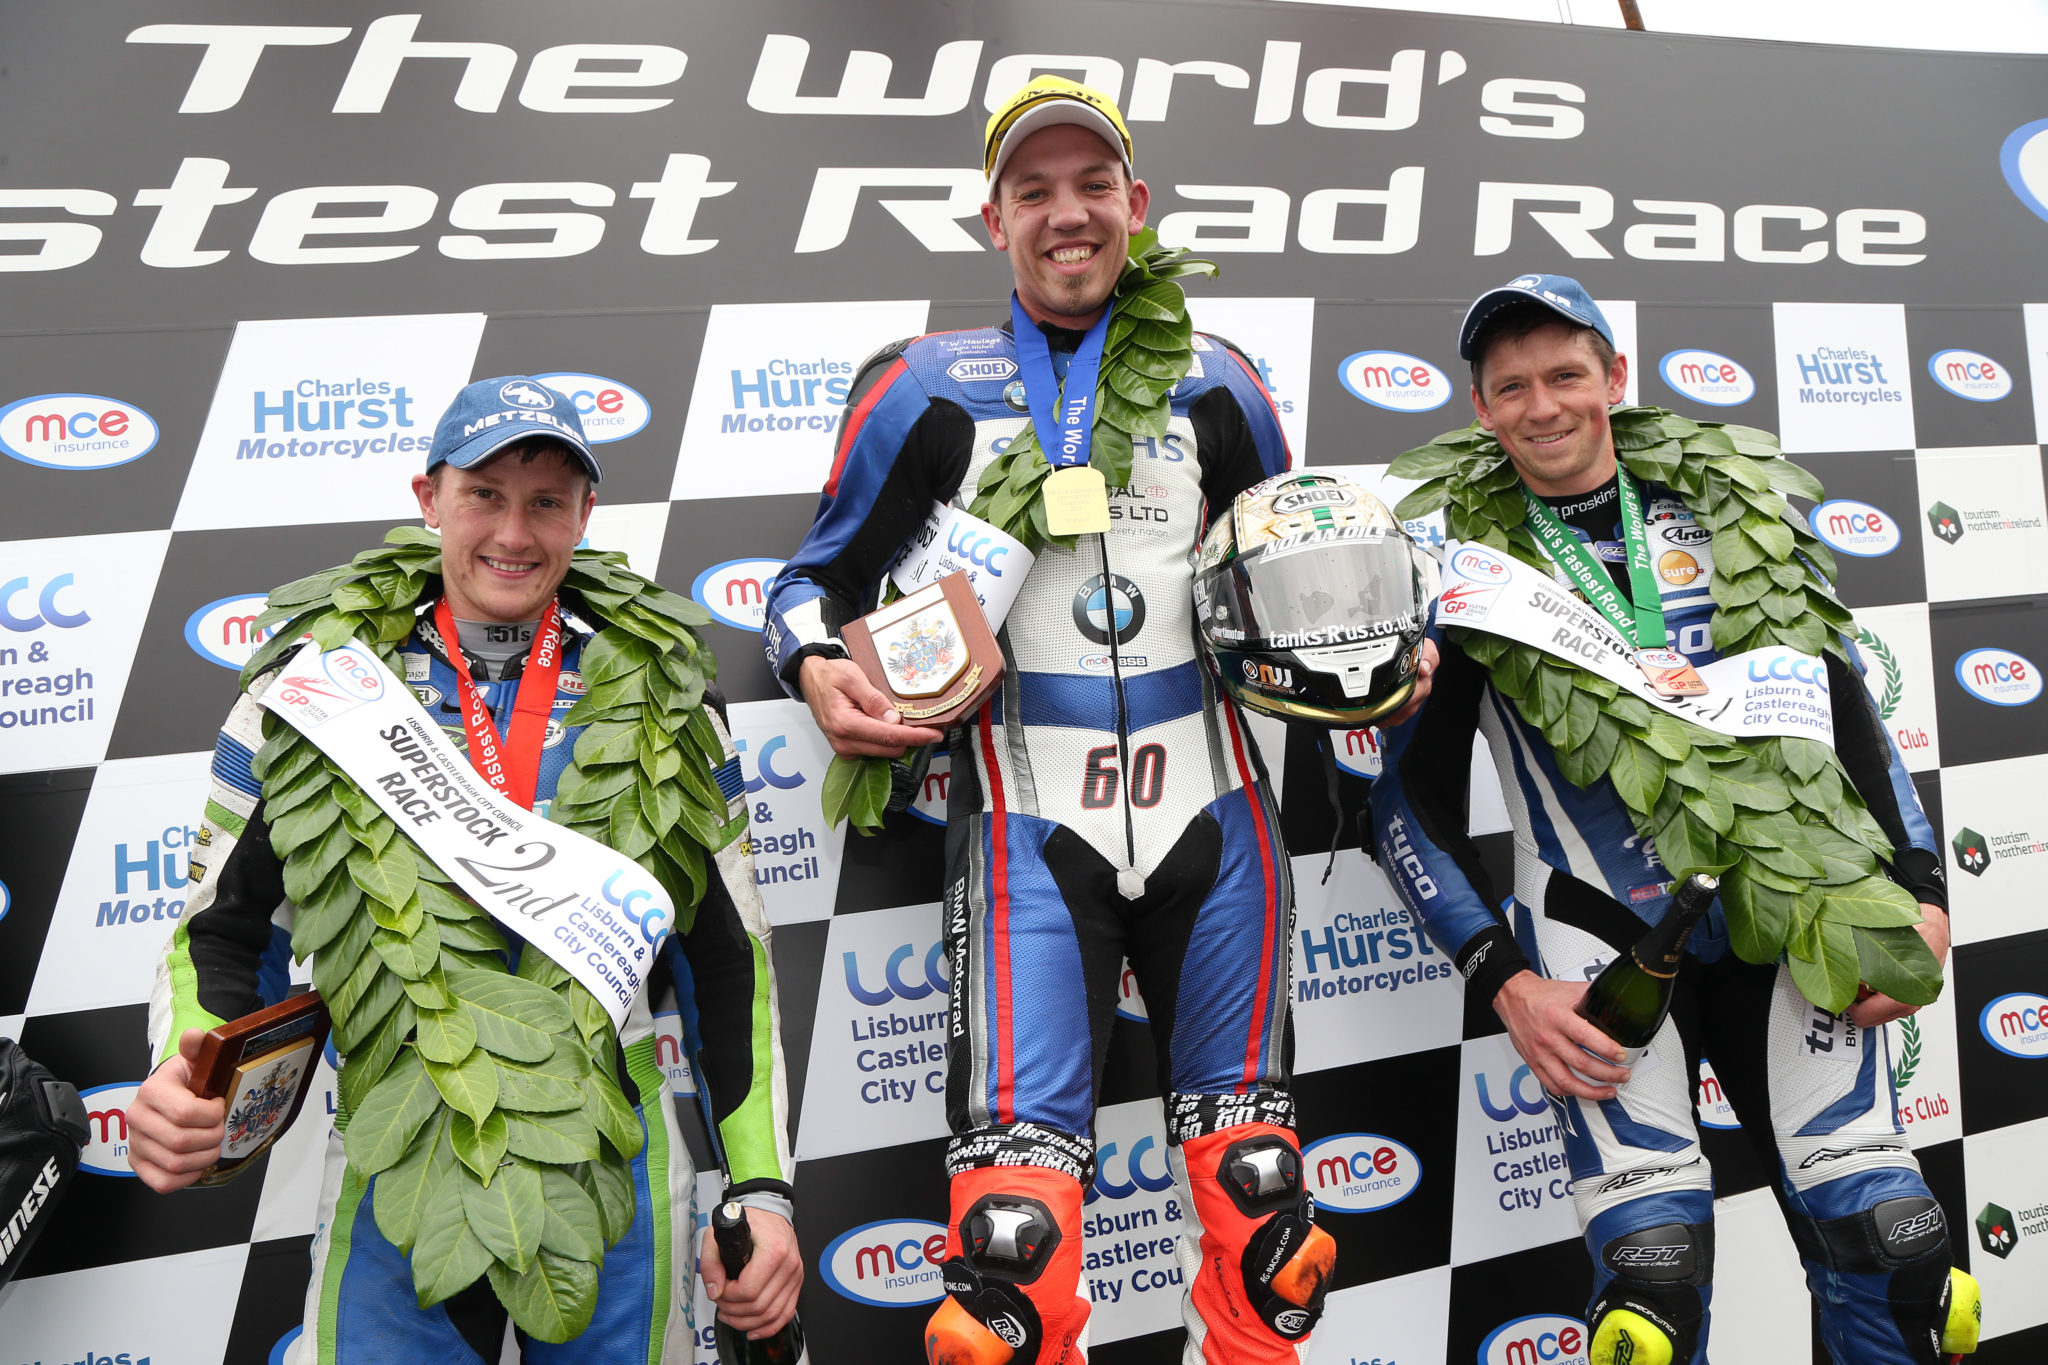 Hickman takes the Ulster GP Superstock title, image credit Pacemaker Press InternationalHickman takes the Ulster GP Superstock title, image credit Pacemaker Press International